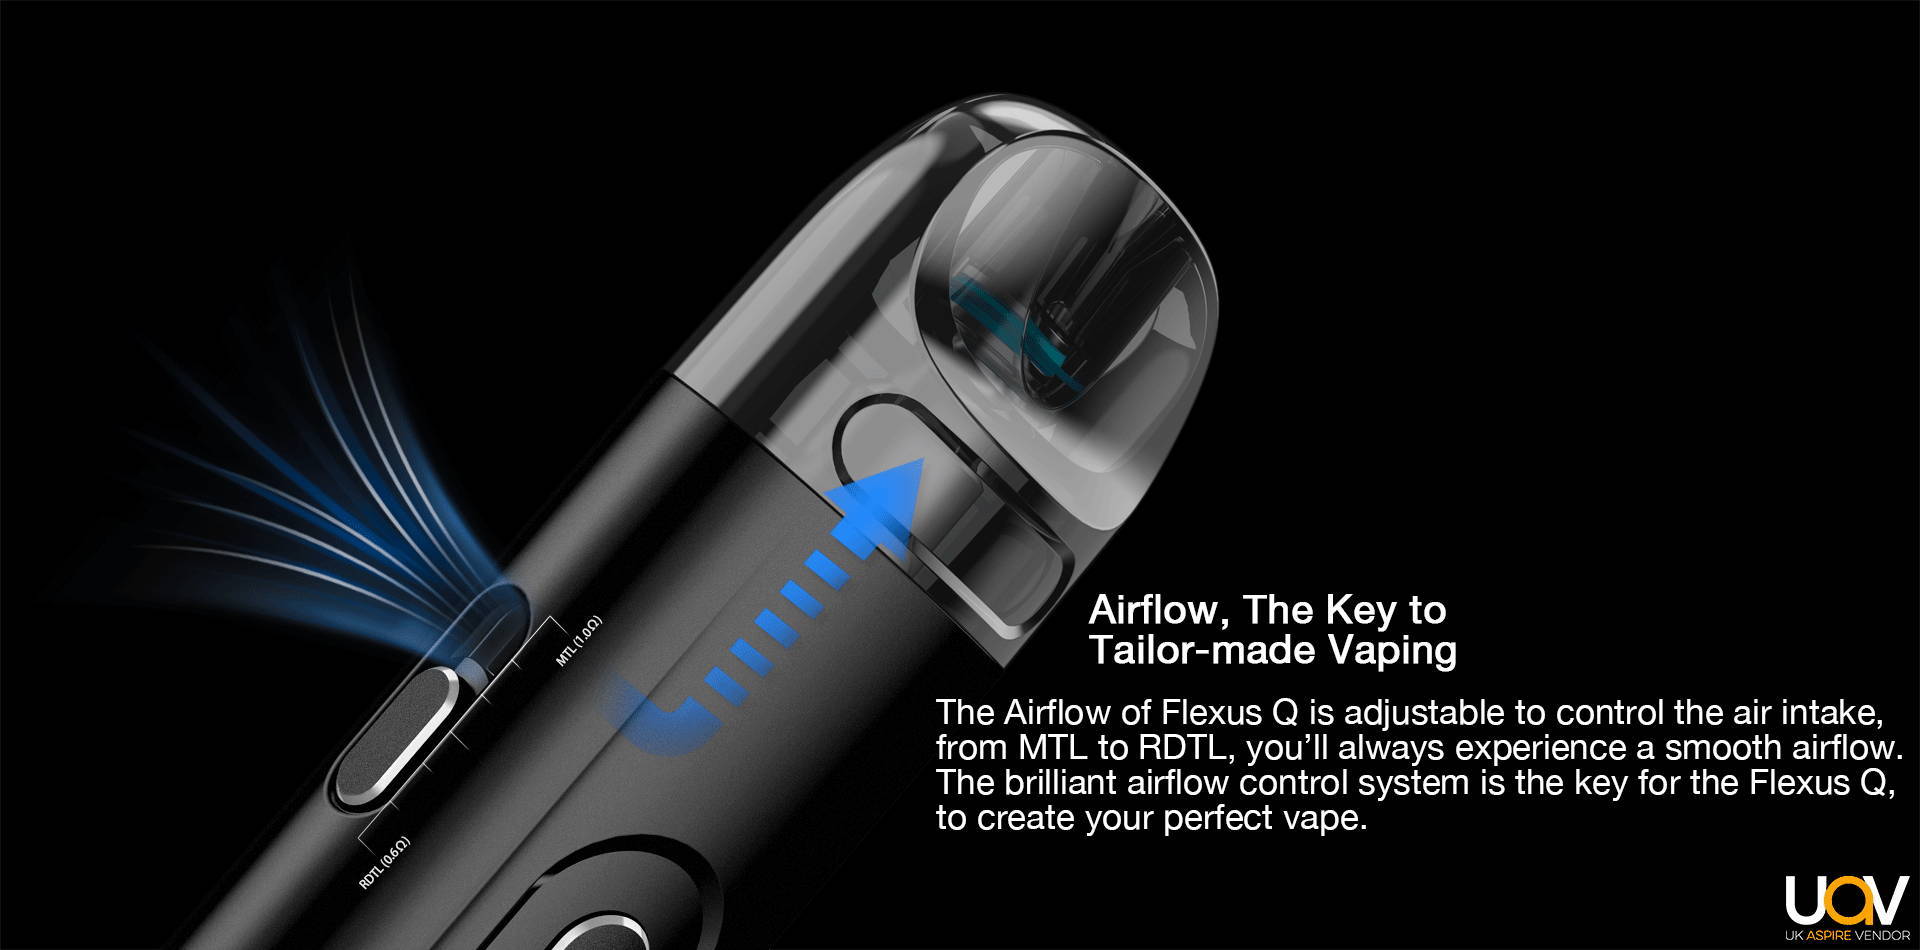 The Airflow of Flexus Q is adjustable to control the air intake, from MTL to RDTL, you’ll always experience a smooth airflow.  The brilliant airflow control system is the key for the Flexus Q,  to create your perfect vape.